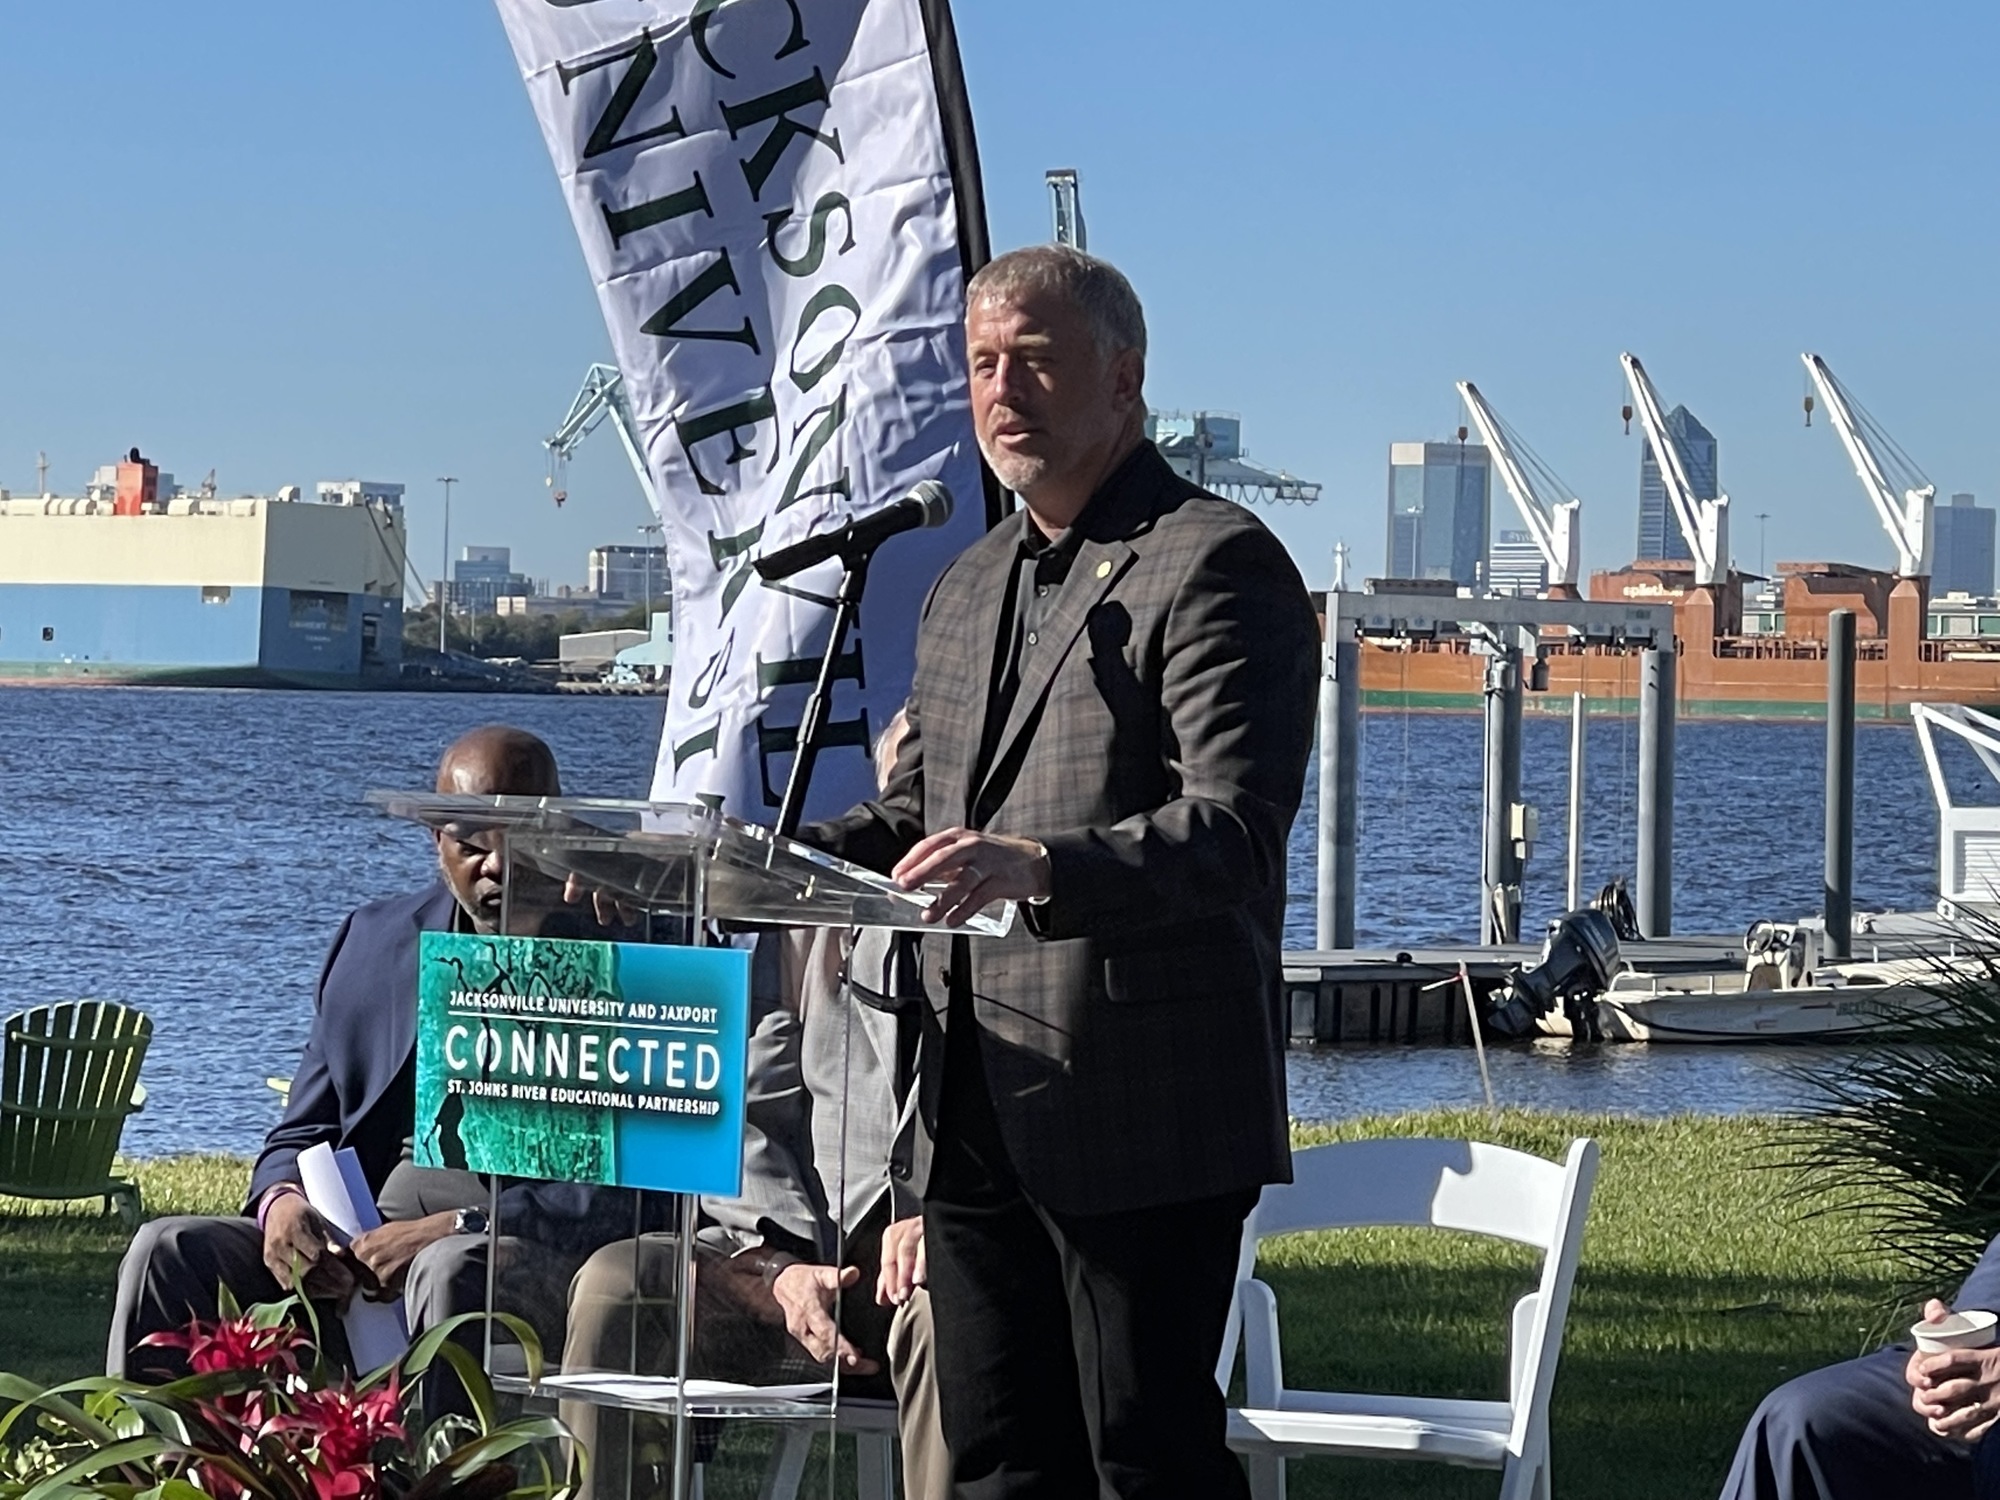 Jamie Shelton, the immediate past chair of the Jacksonville Port Authority and chair of the Jacksonville University Board of Trustees, speaks Nov. 15 during the announcement of the “Connected” imitative.